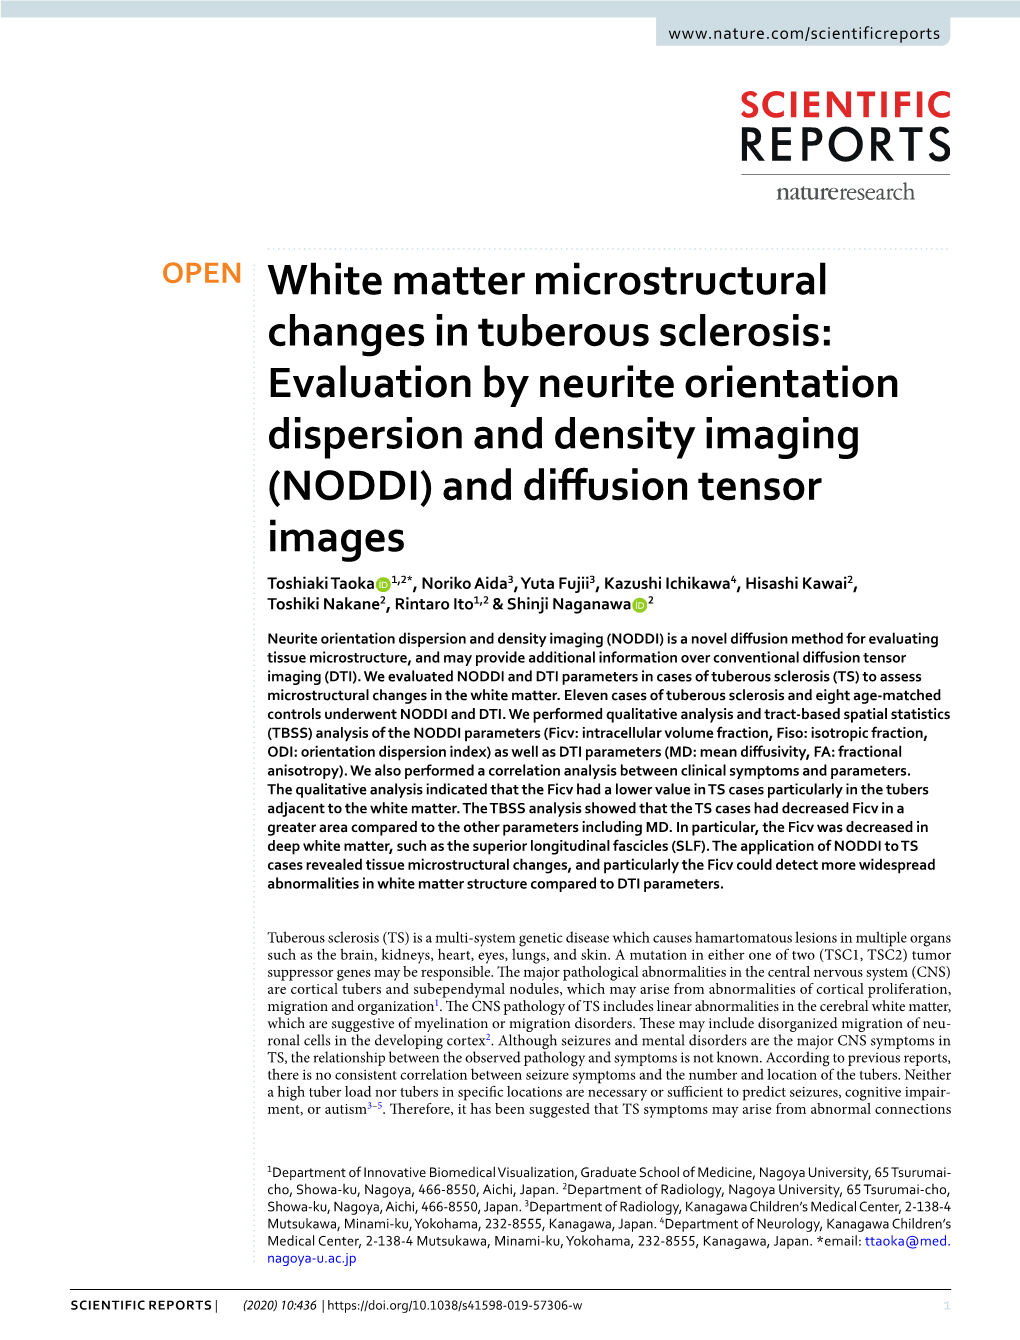 White Matter Microstructural Changes in Tuberous Sclerosis